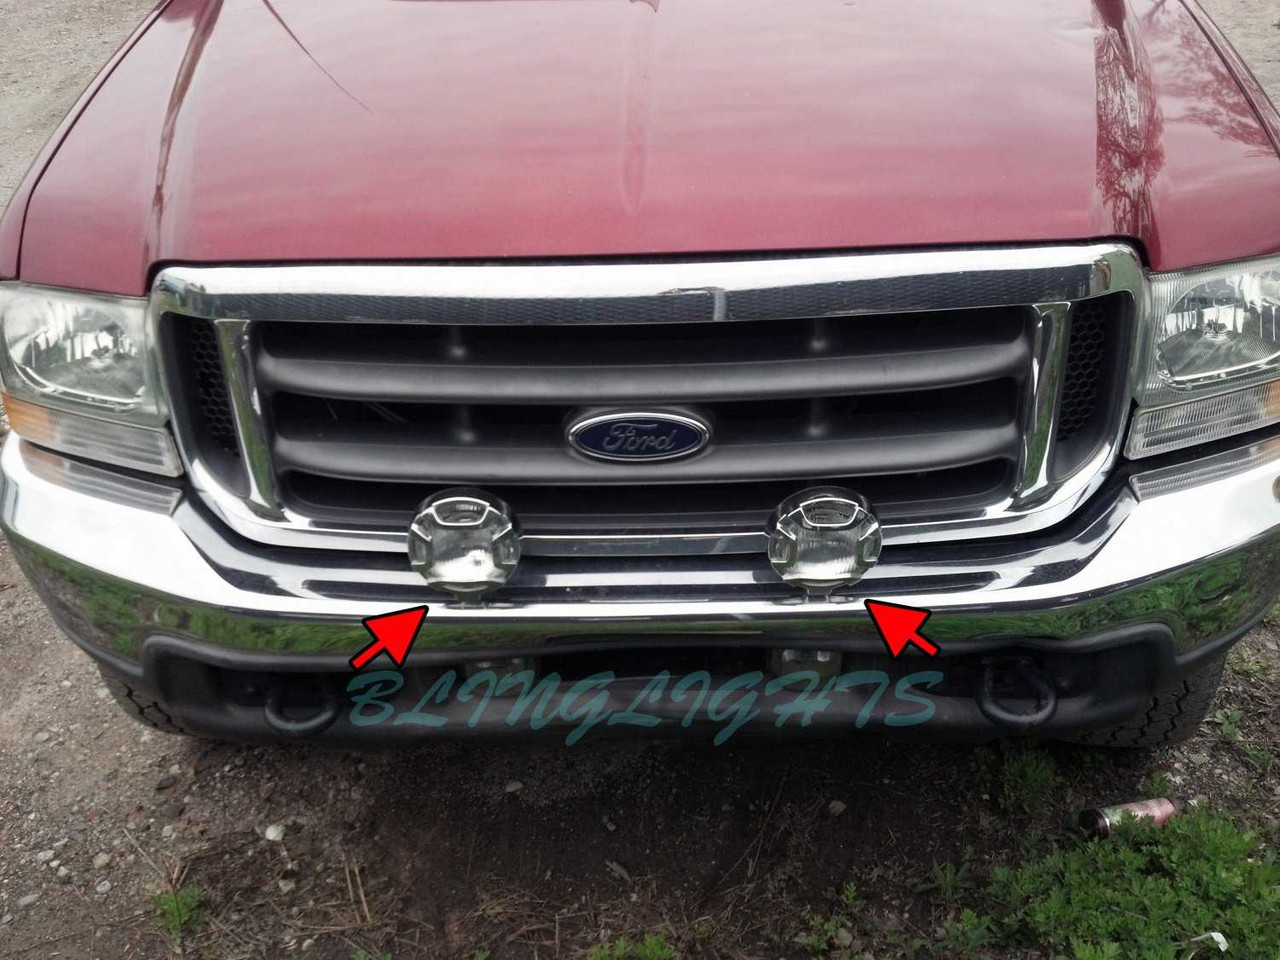 Ford F-550 F550 Off Road Auxiliary Light Bar Off Road Driving Lamp Kit